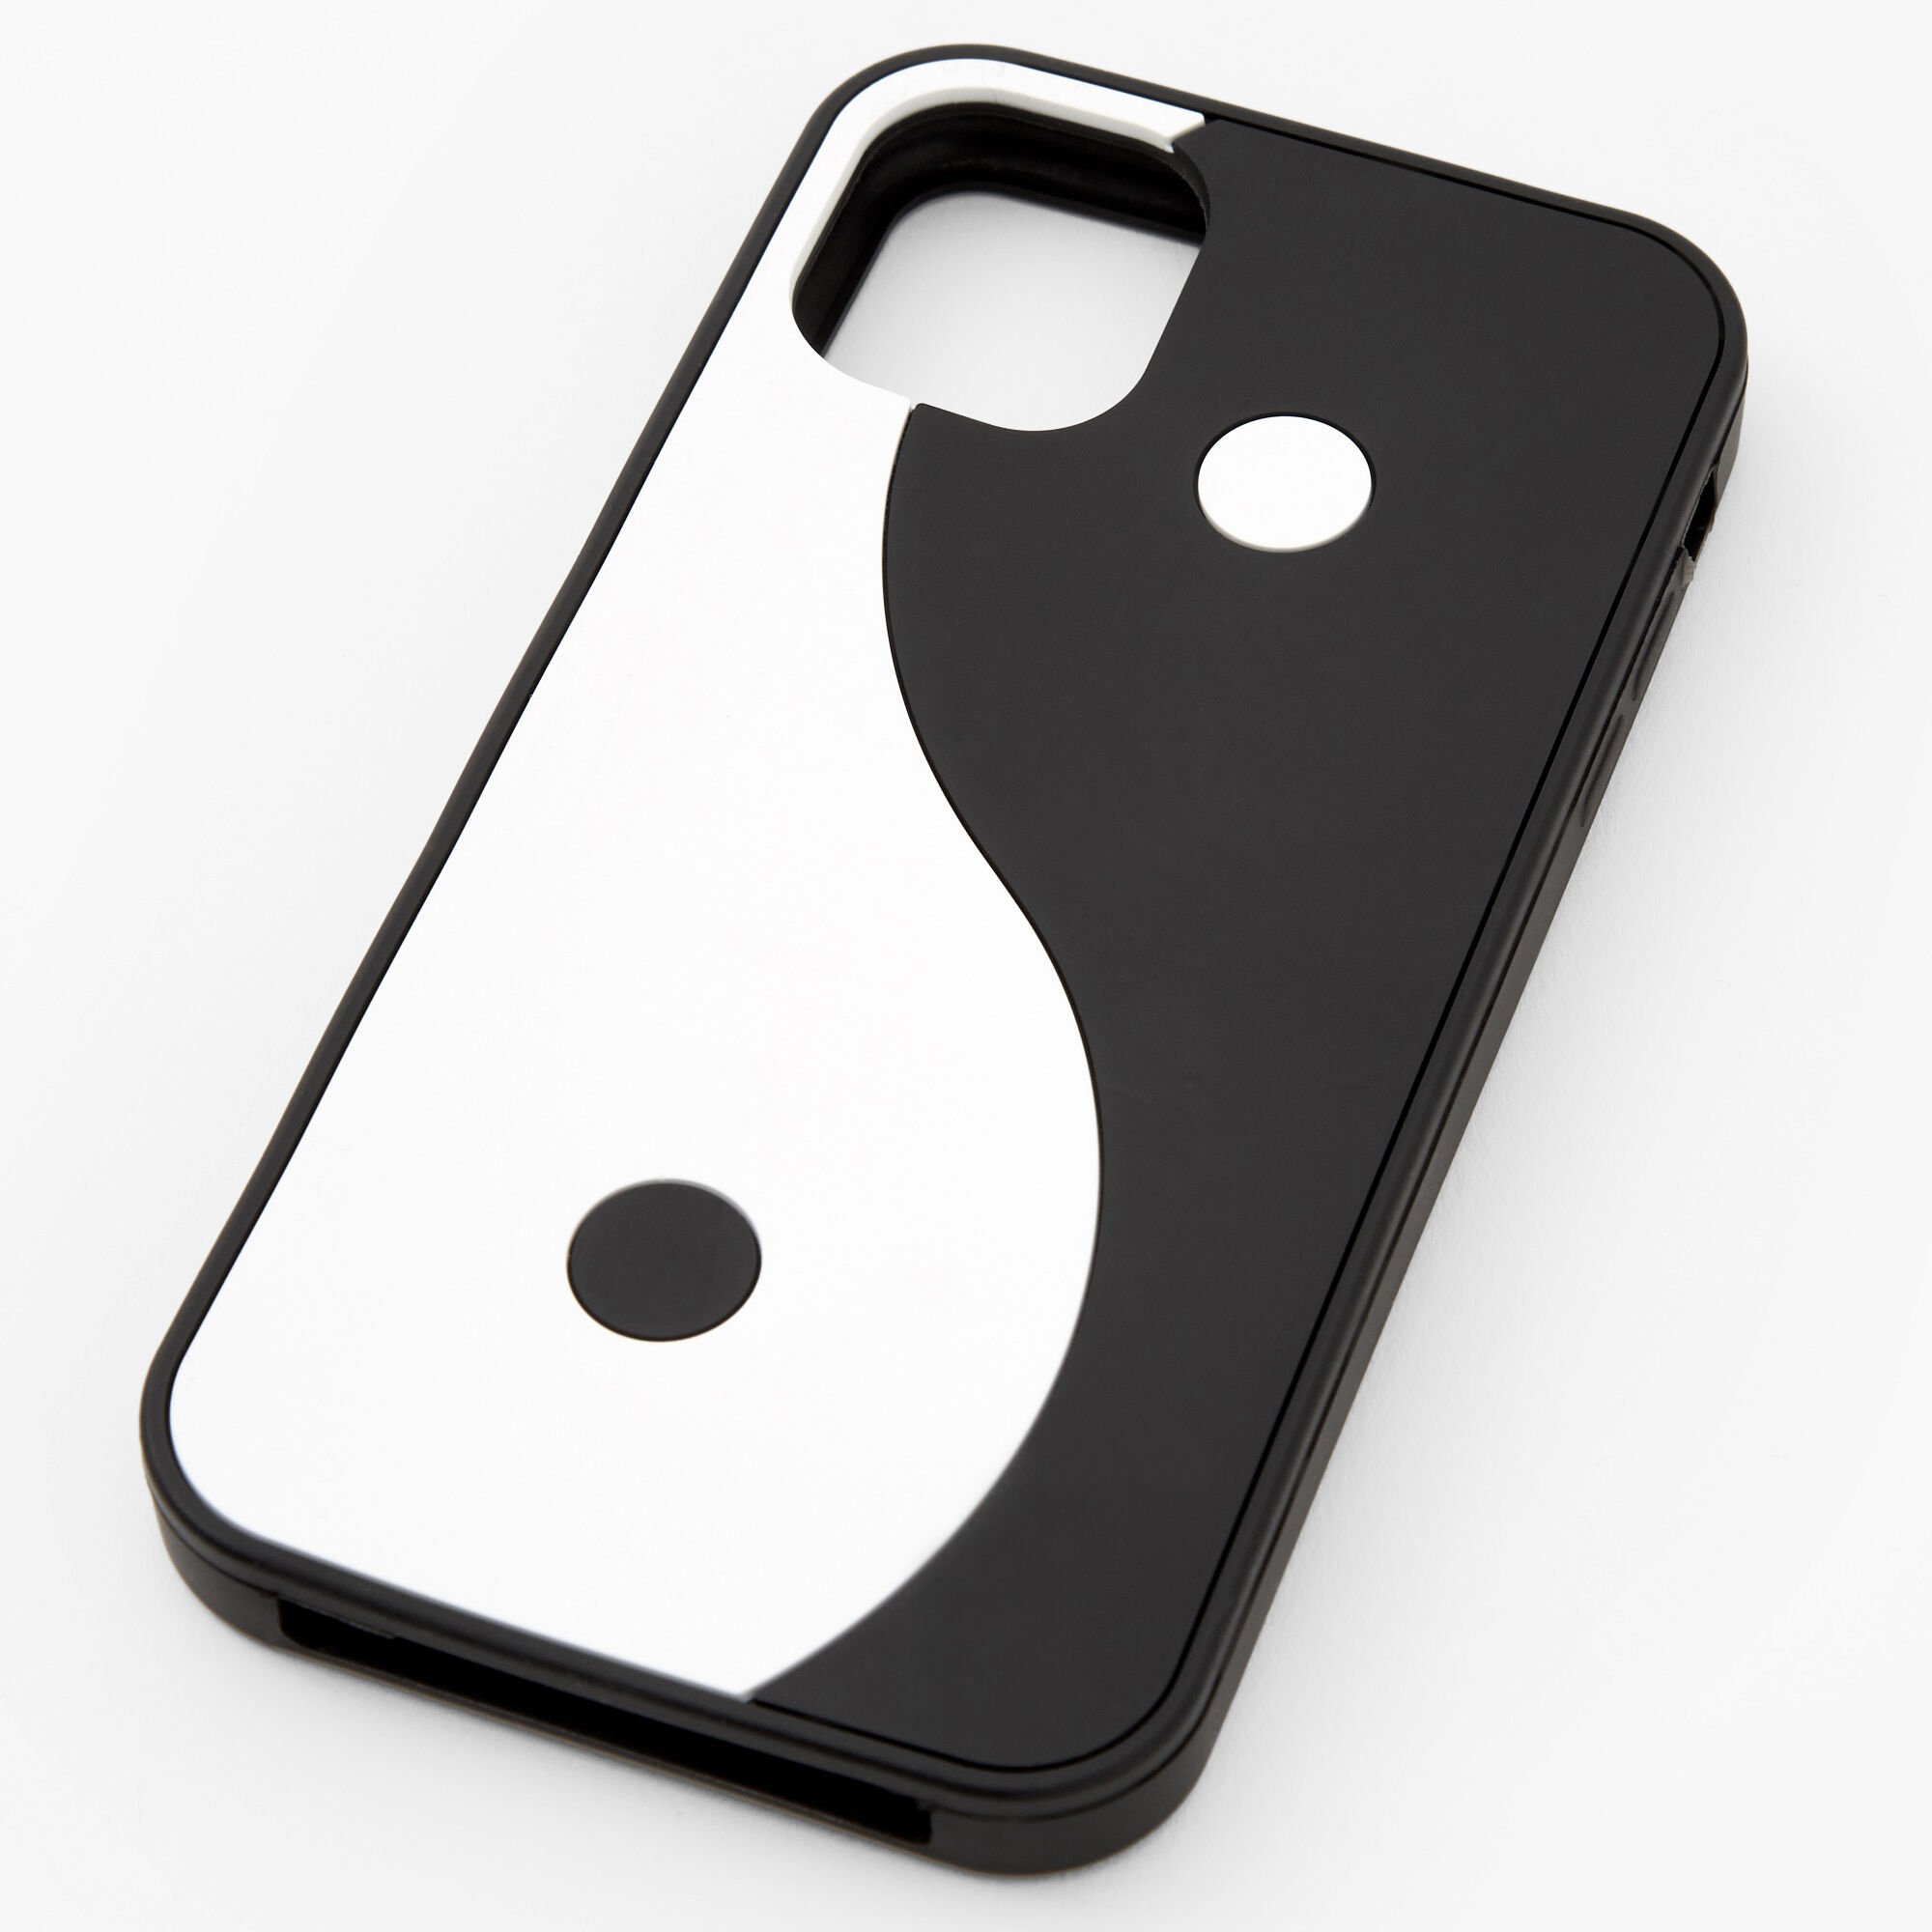 View Claires Black Yin Yang Phone Case Fits Iphone 11 White information